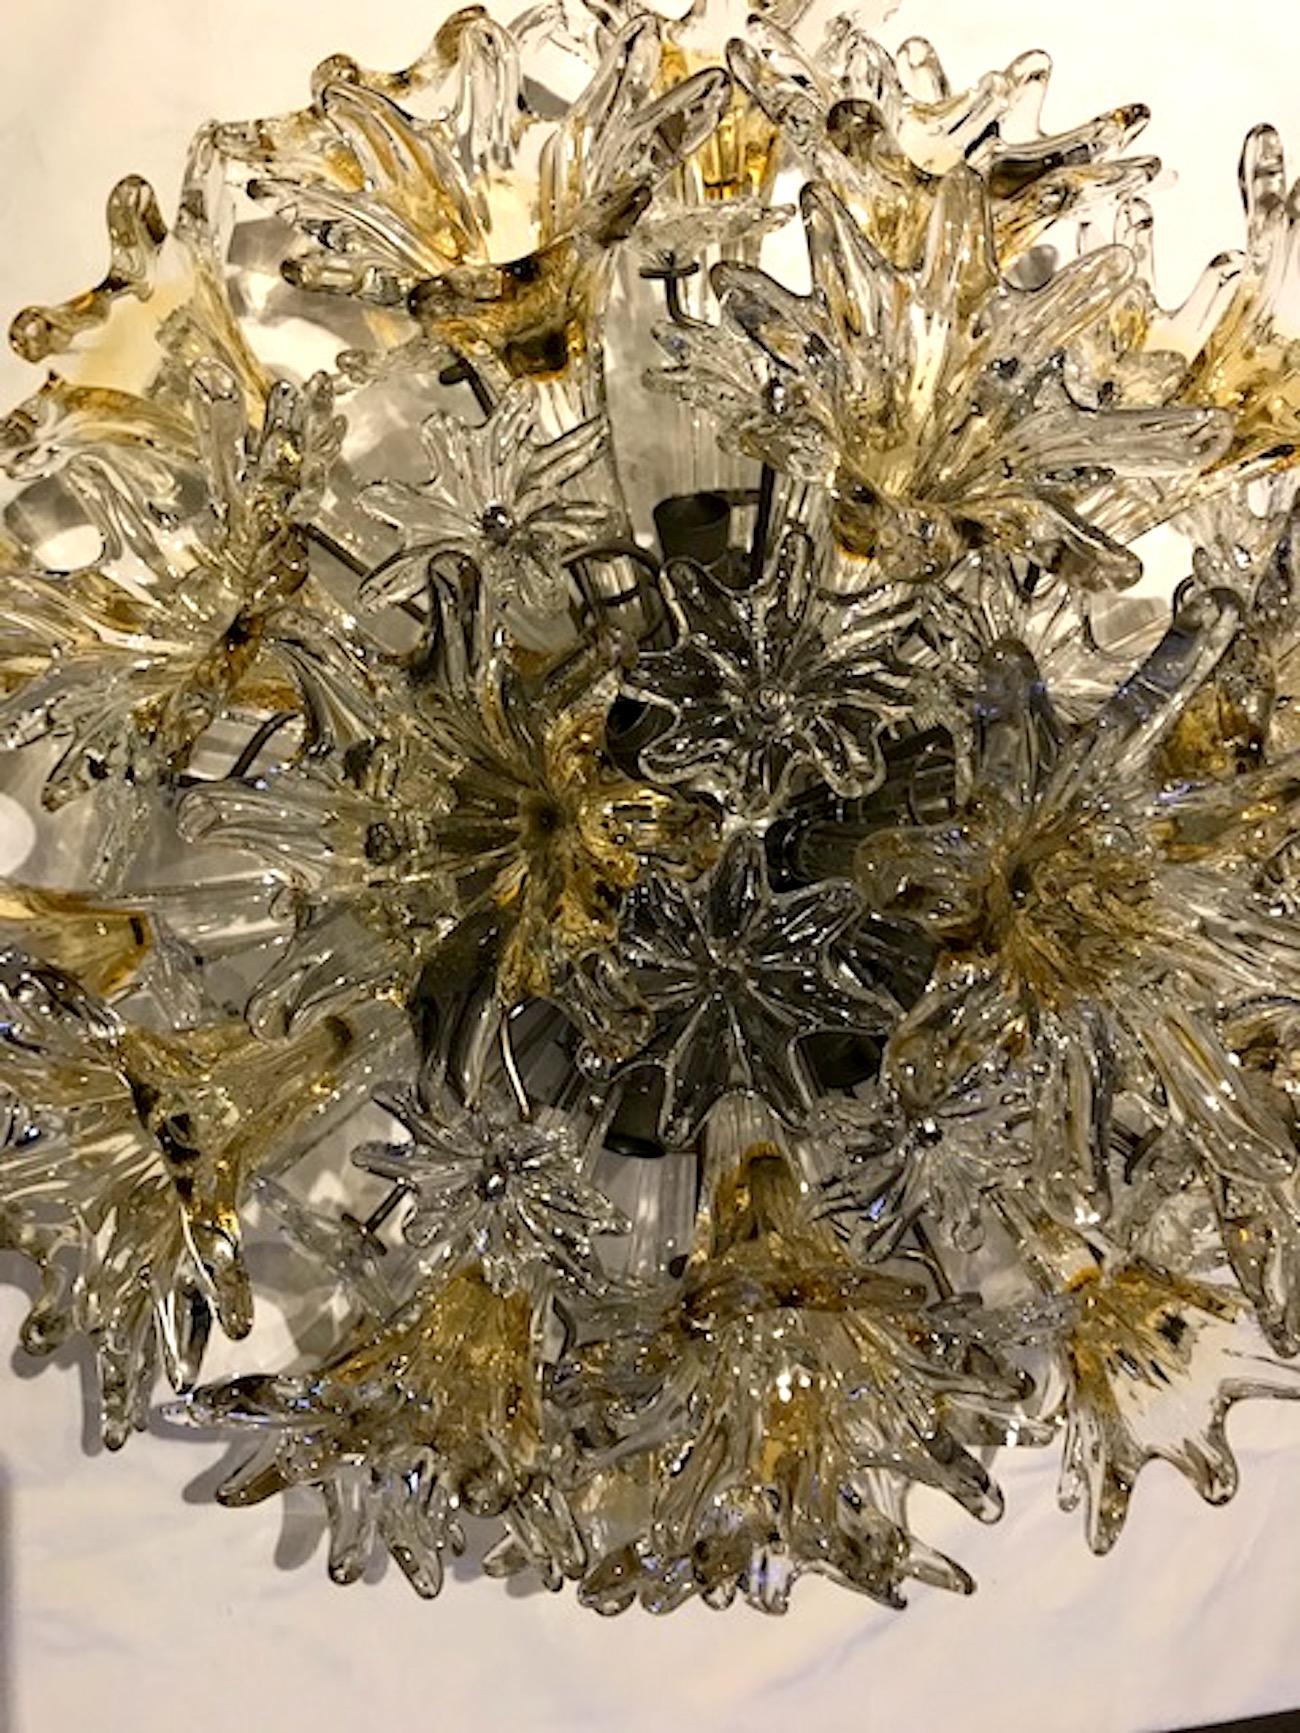 Deigned by Toni Zuccheri for Venini is this Esprit ceiling mount light. Venini describes the model “Esprit” as an explosion of flowers and stars in hand blown, handcrafted glass. Designed to illuminate, shine, sparkle and excite, “Esprit” is ideal